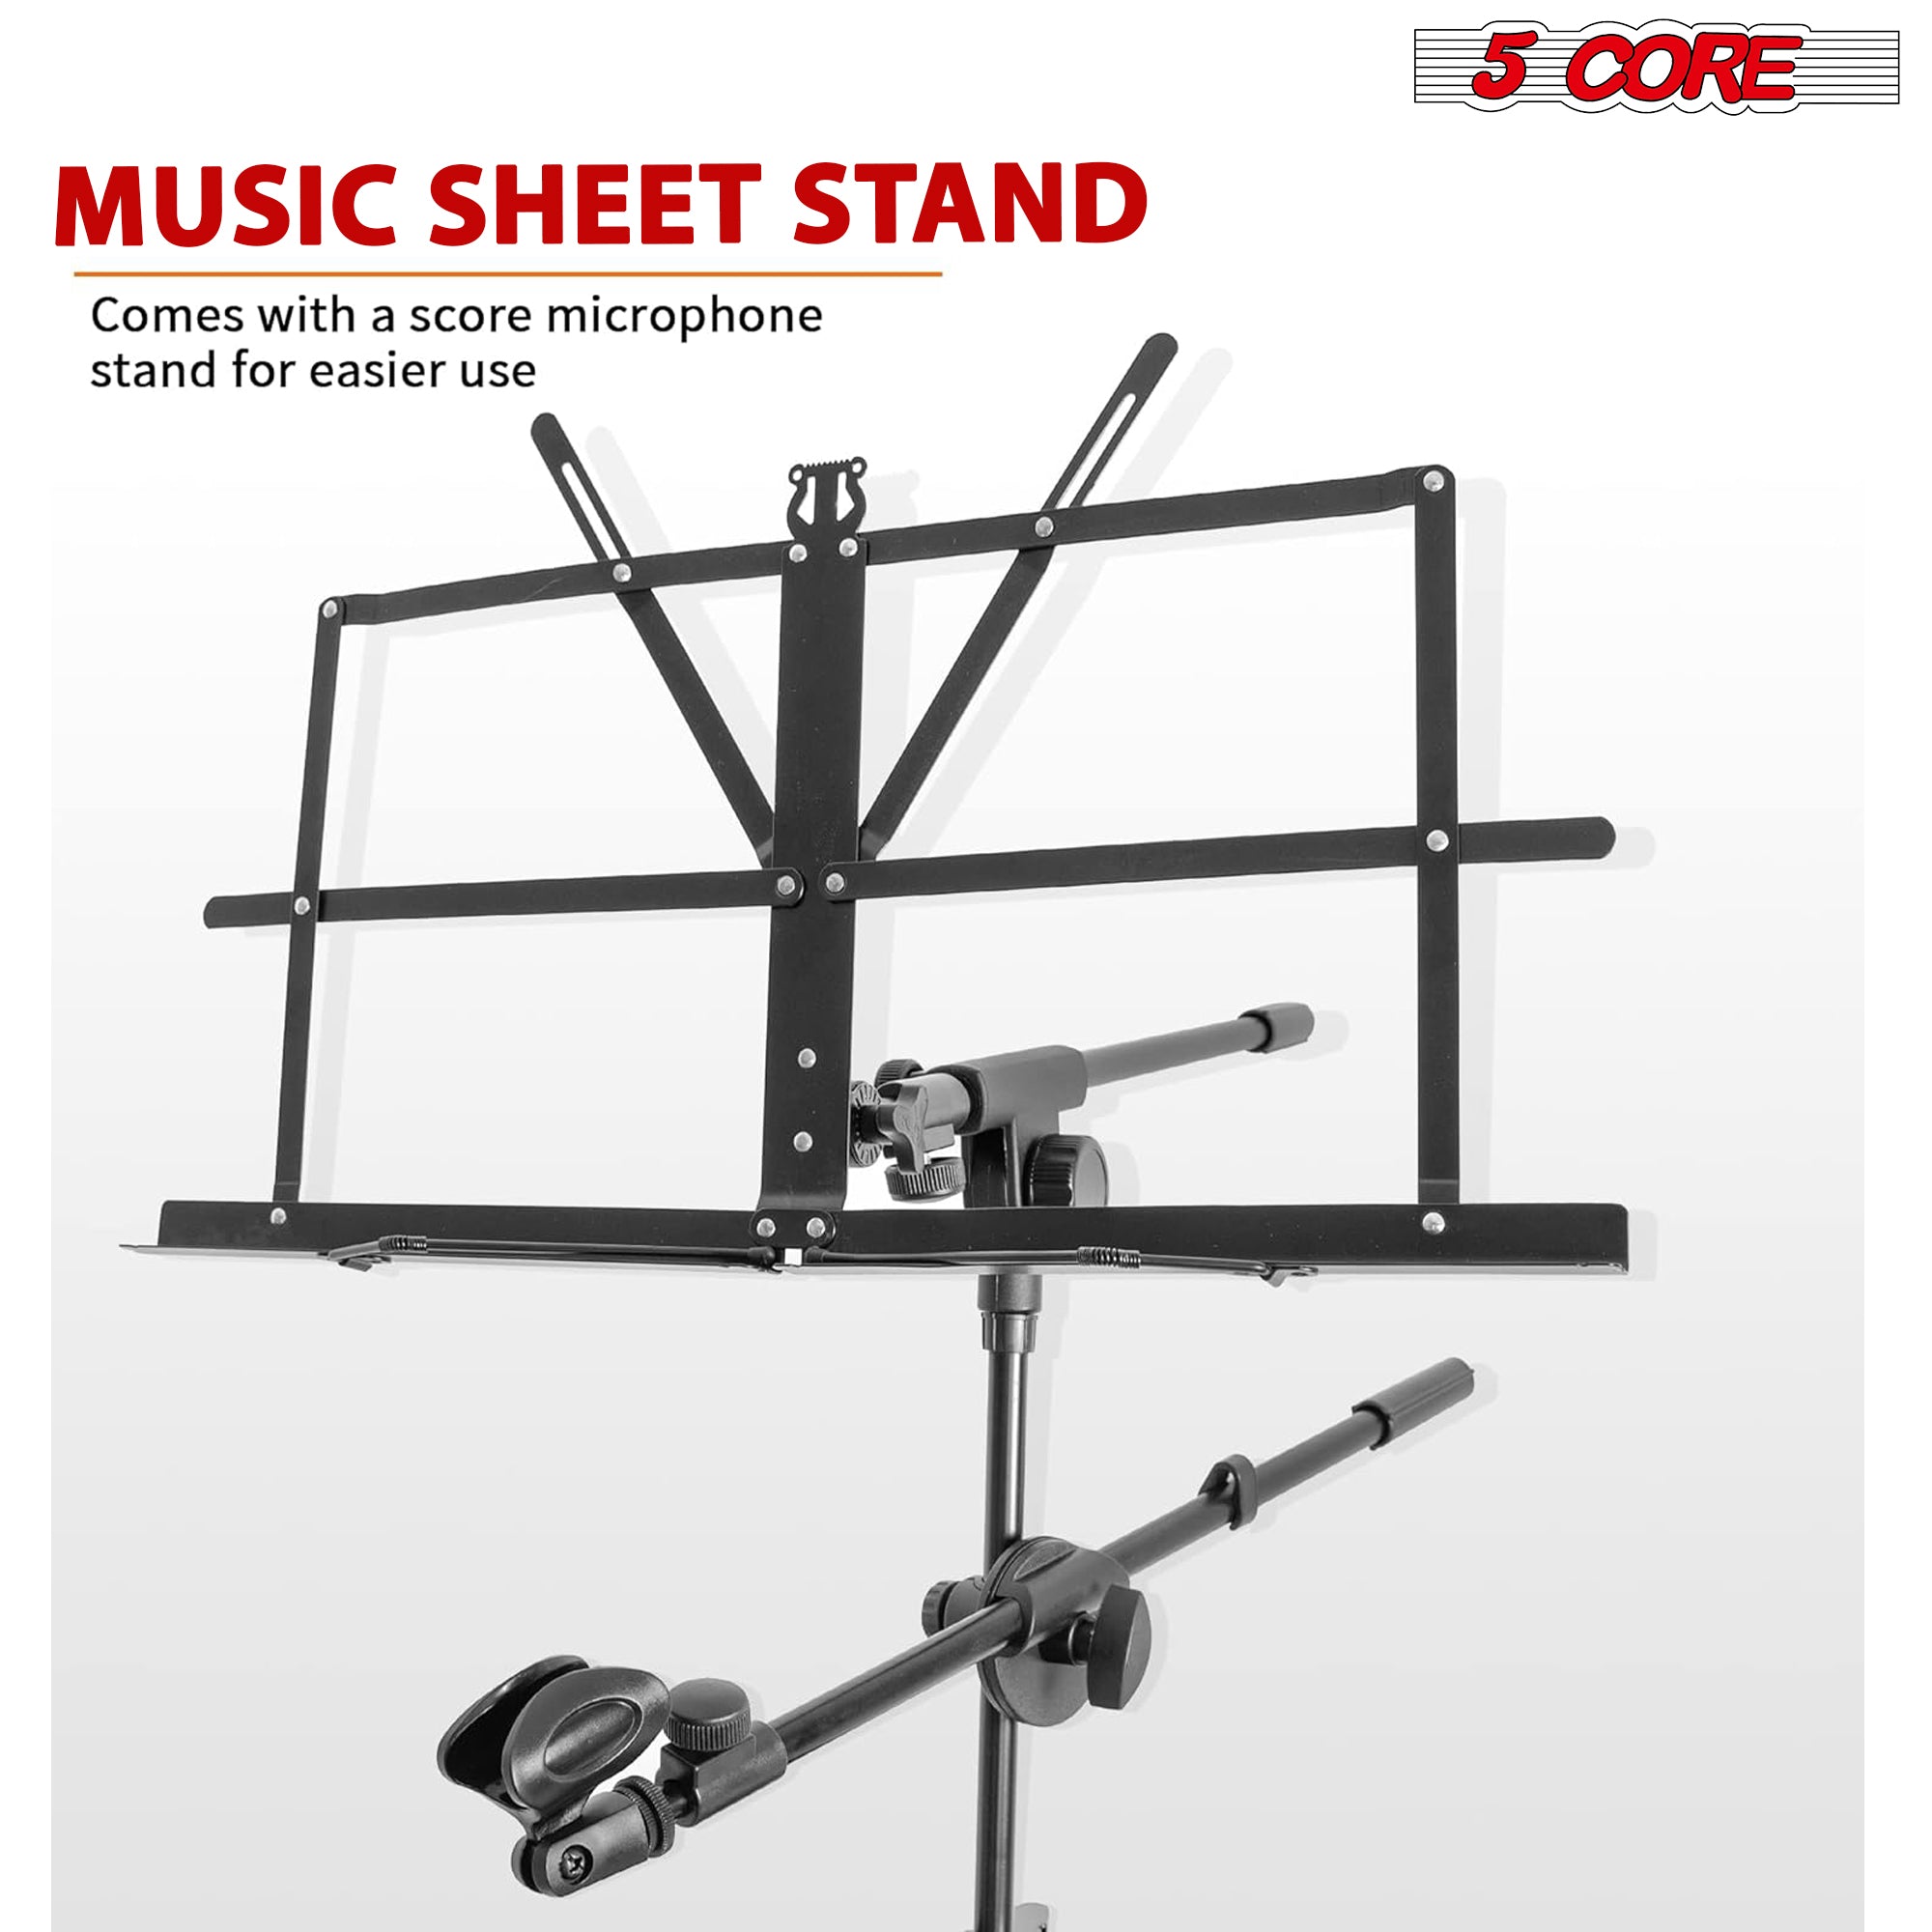 5 Core 2 Tier Heavy Duty Multi Functional Portable Music Stand Digital Keyboard Stand Extension Adapter Telescopic Arm Mic Stand Height & with Adjustment Bag Included Black -KS C 2TD